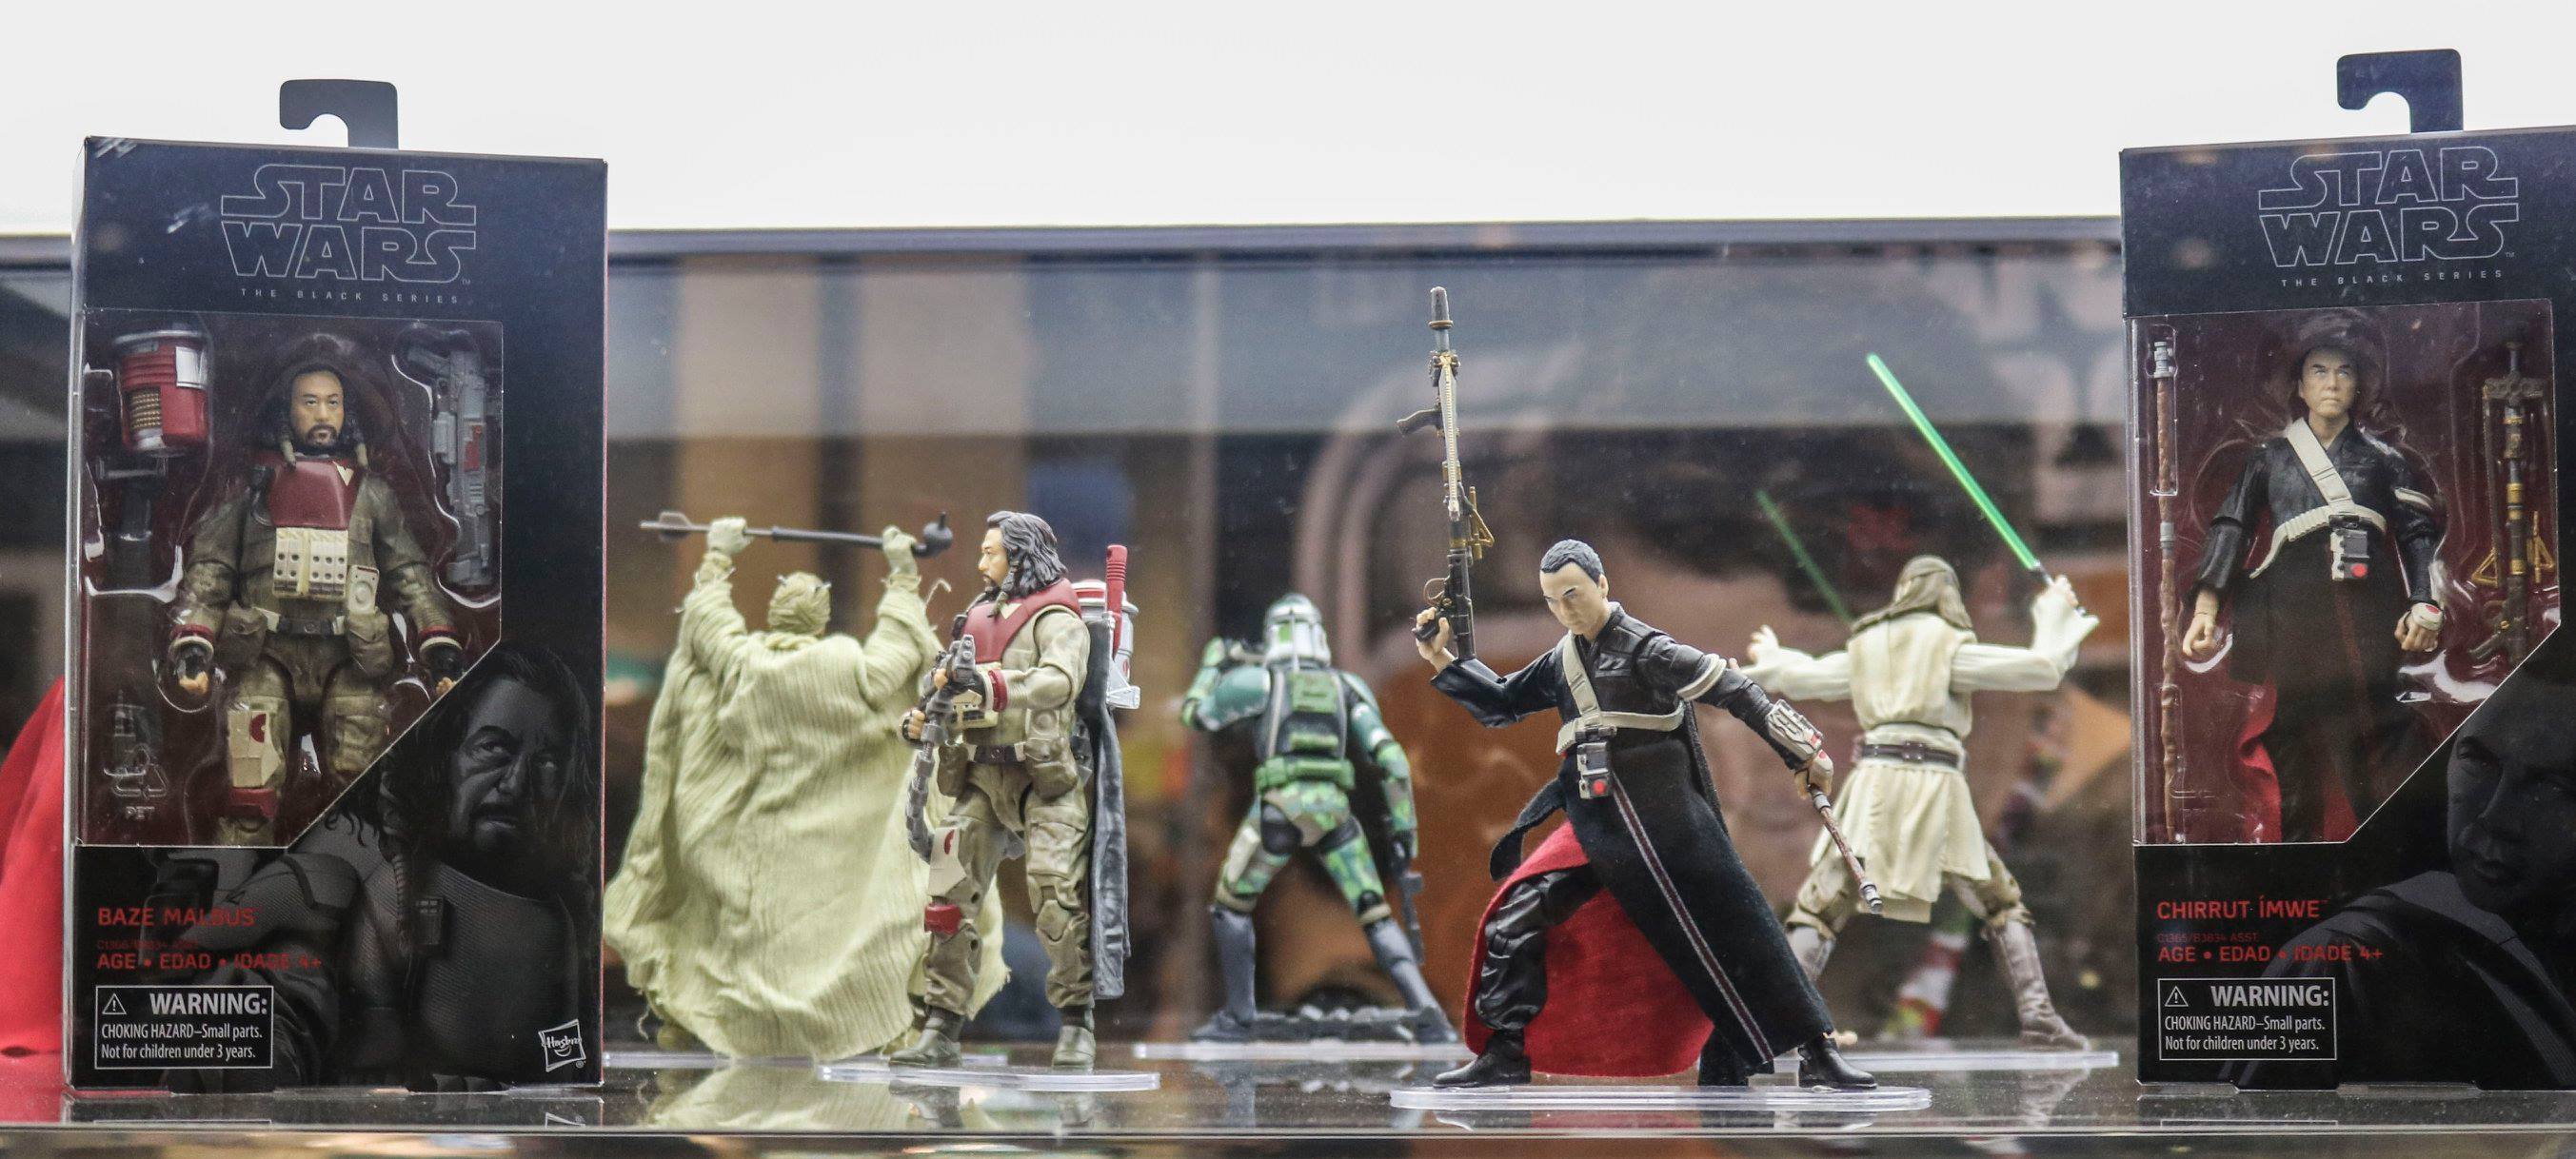 Habro's Black Series is sure to make an explosive appearance, as seen here at Star Wars Celebration Orlando